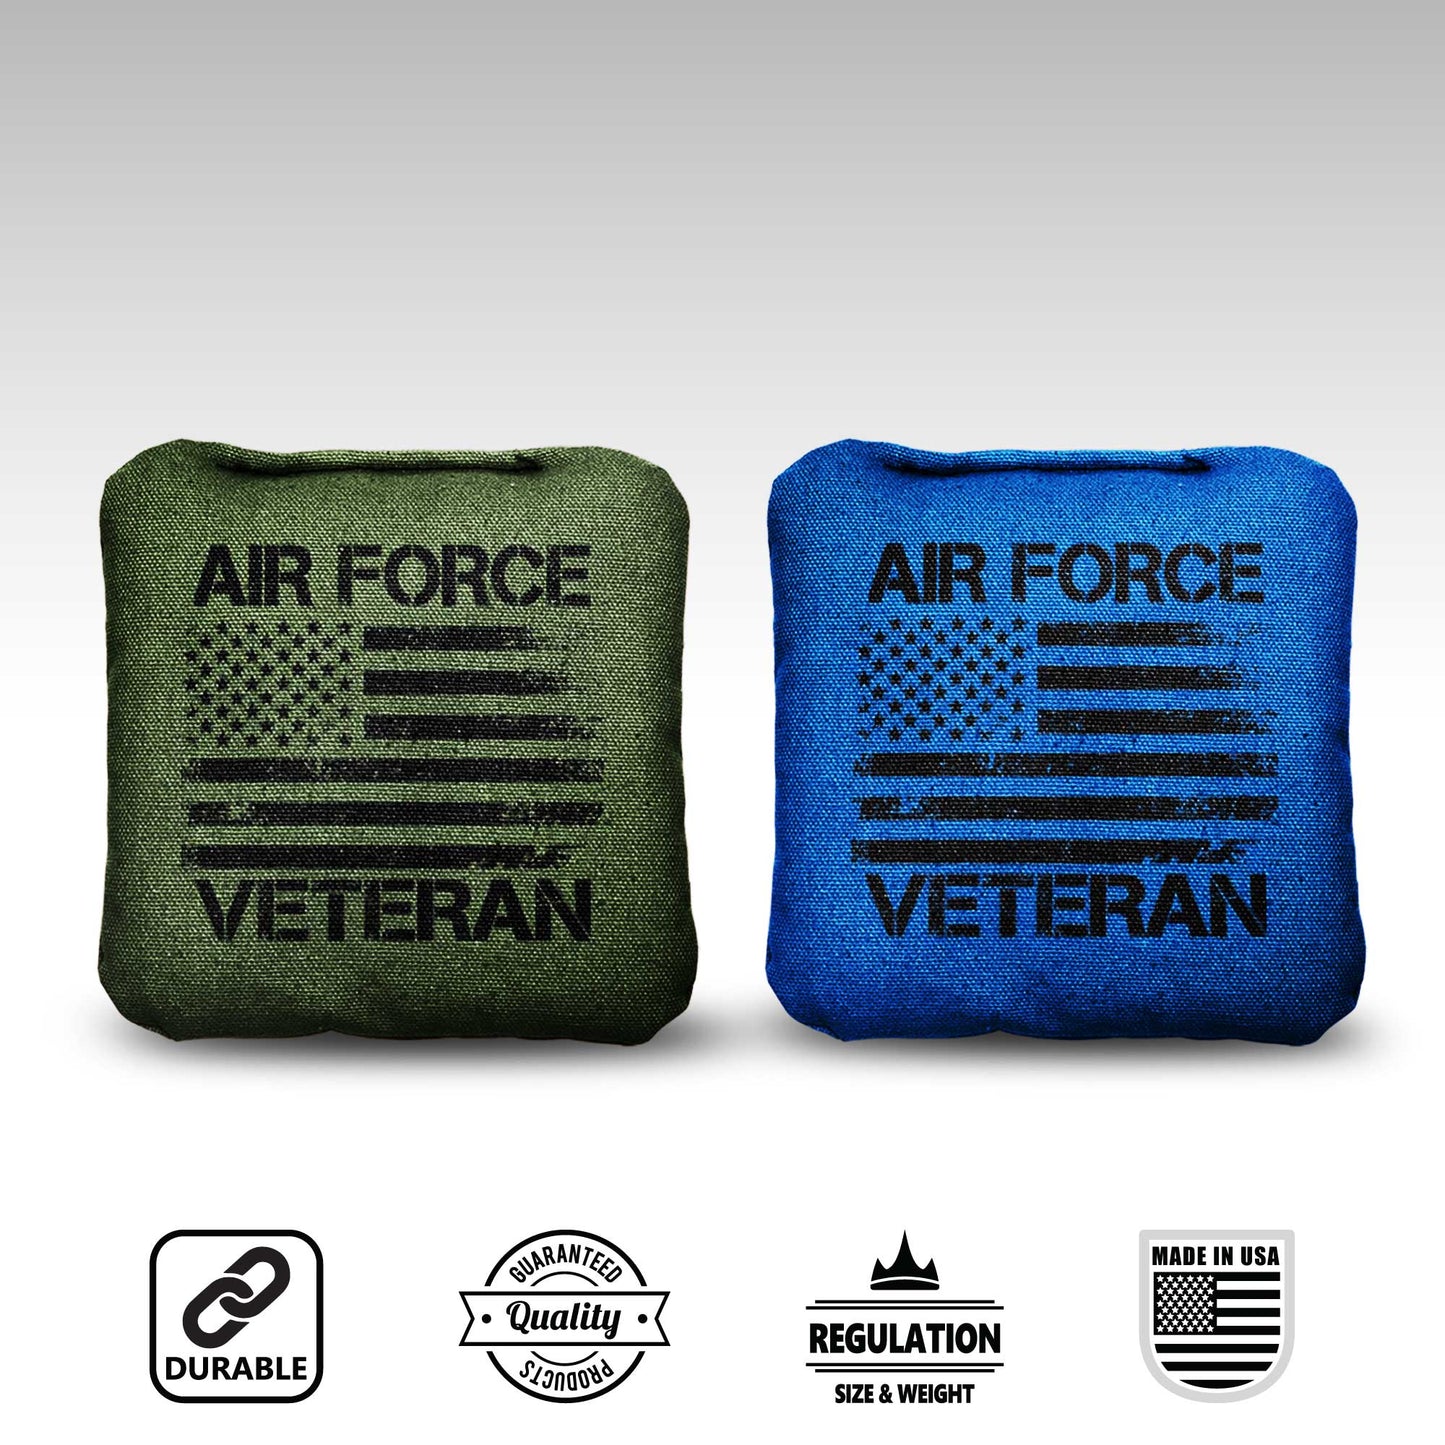 The Air Force Vets - 8 Cornhole Bags